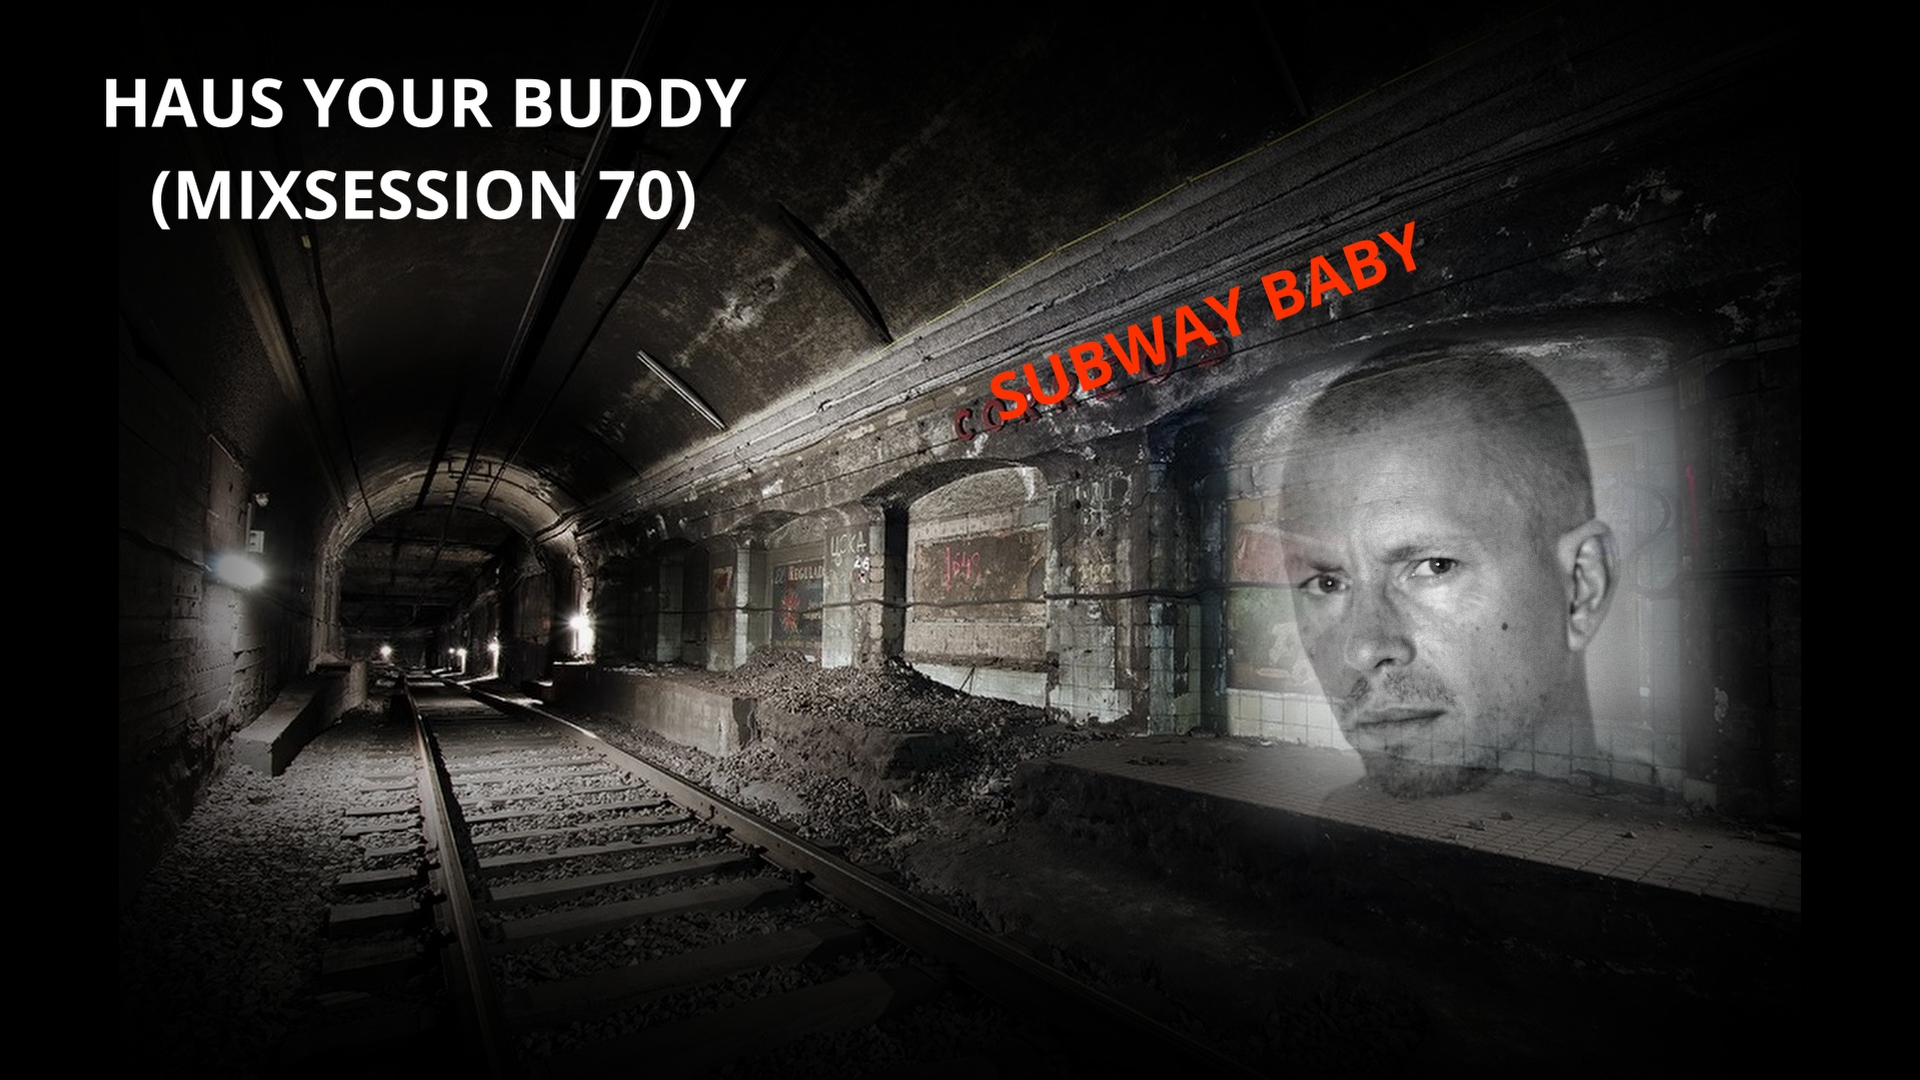 Subway Baby-Haus Your Buddy (Mixsession 70)